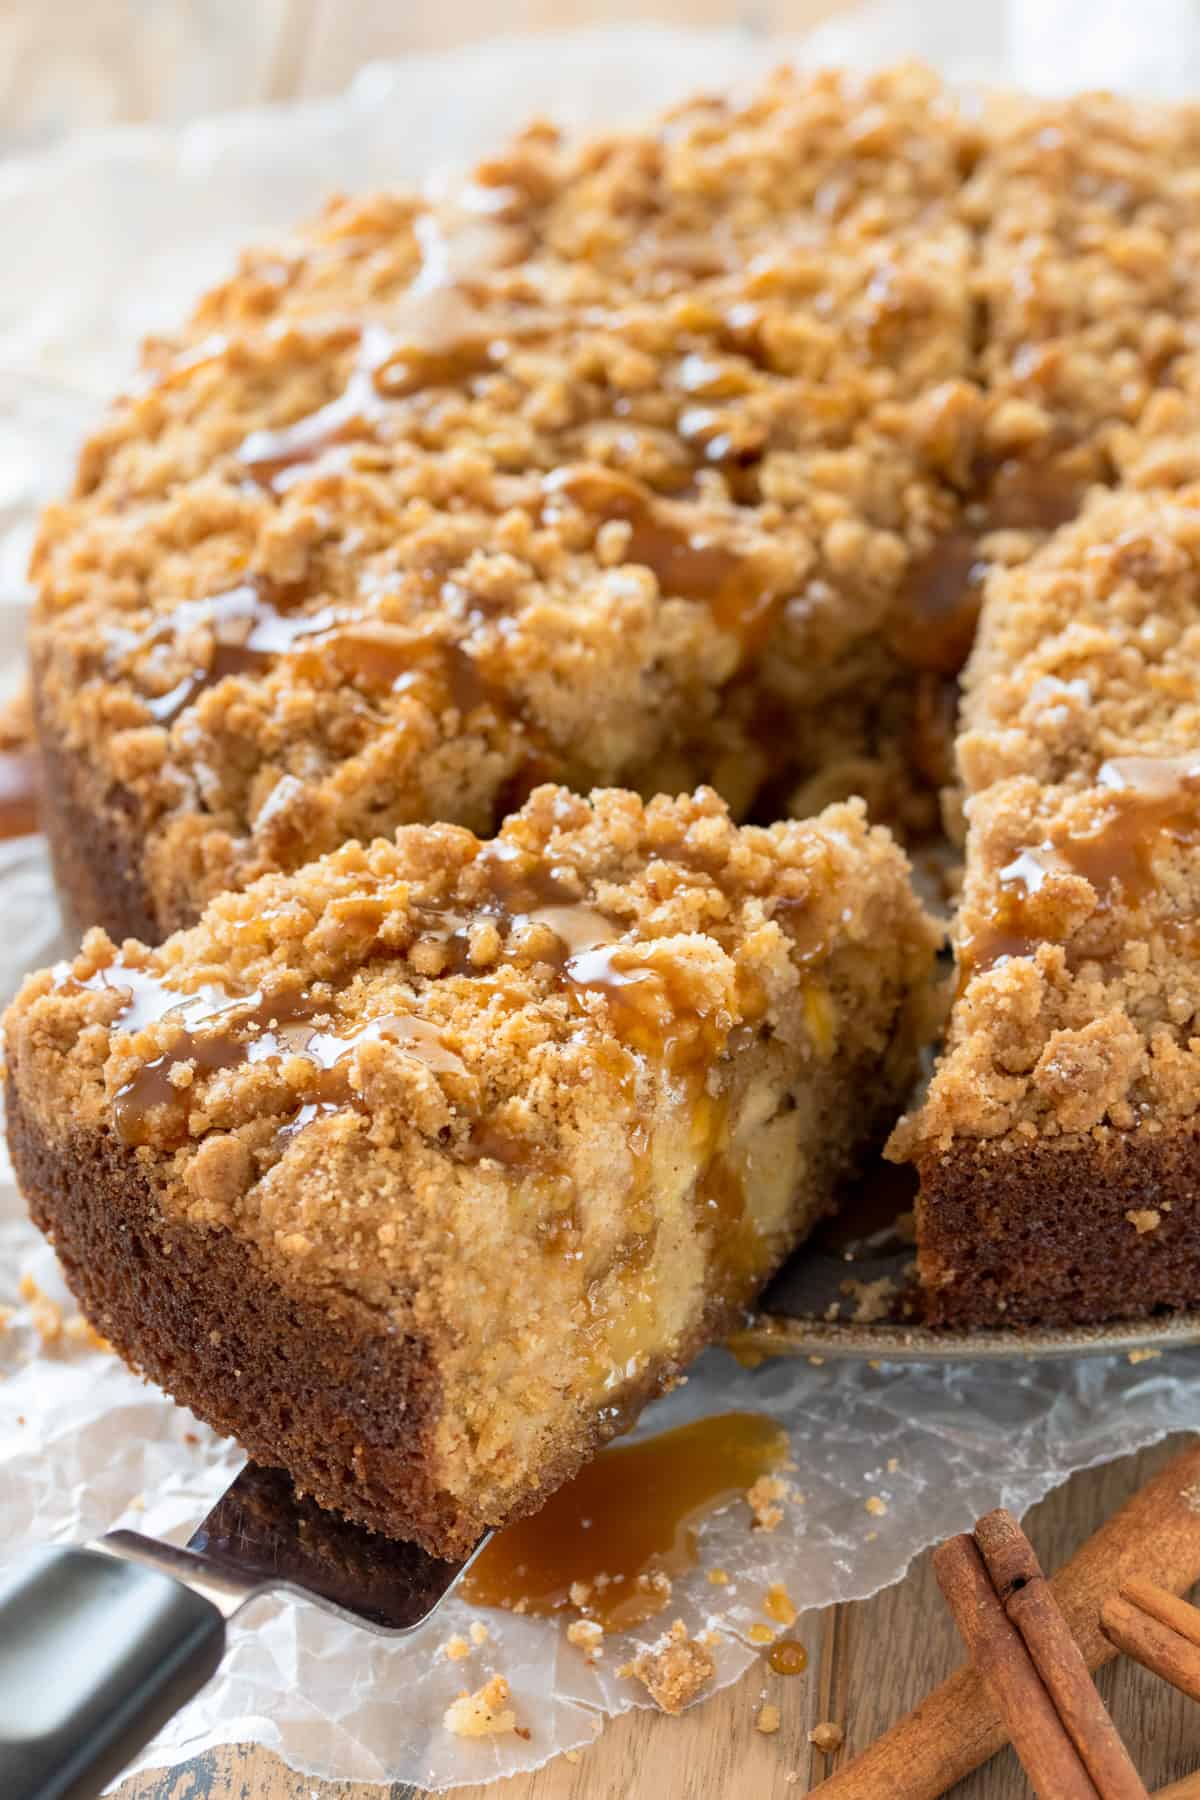 A slice of Apple Crumb cake drizzled with caramel sauce being pulled from a full cake.